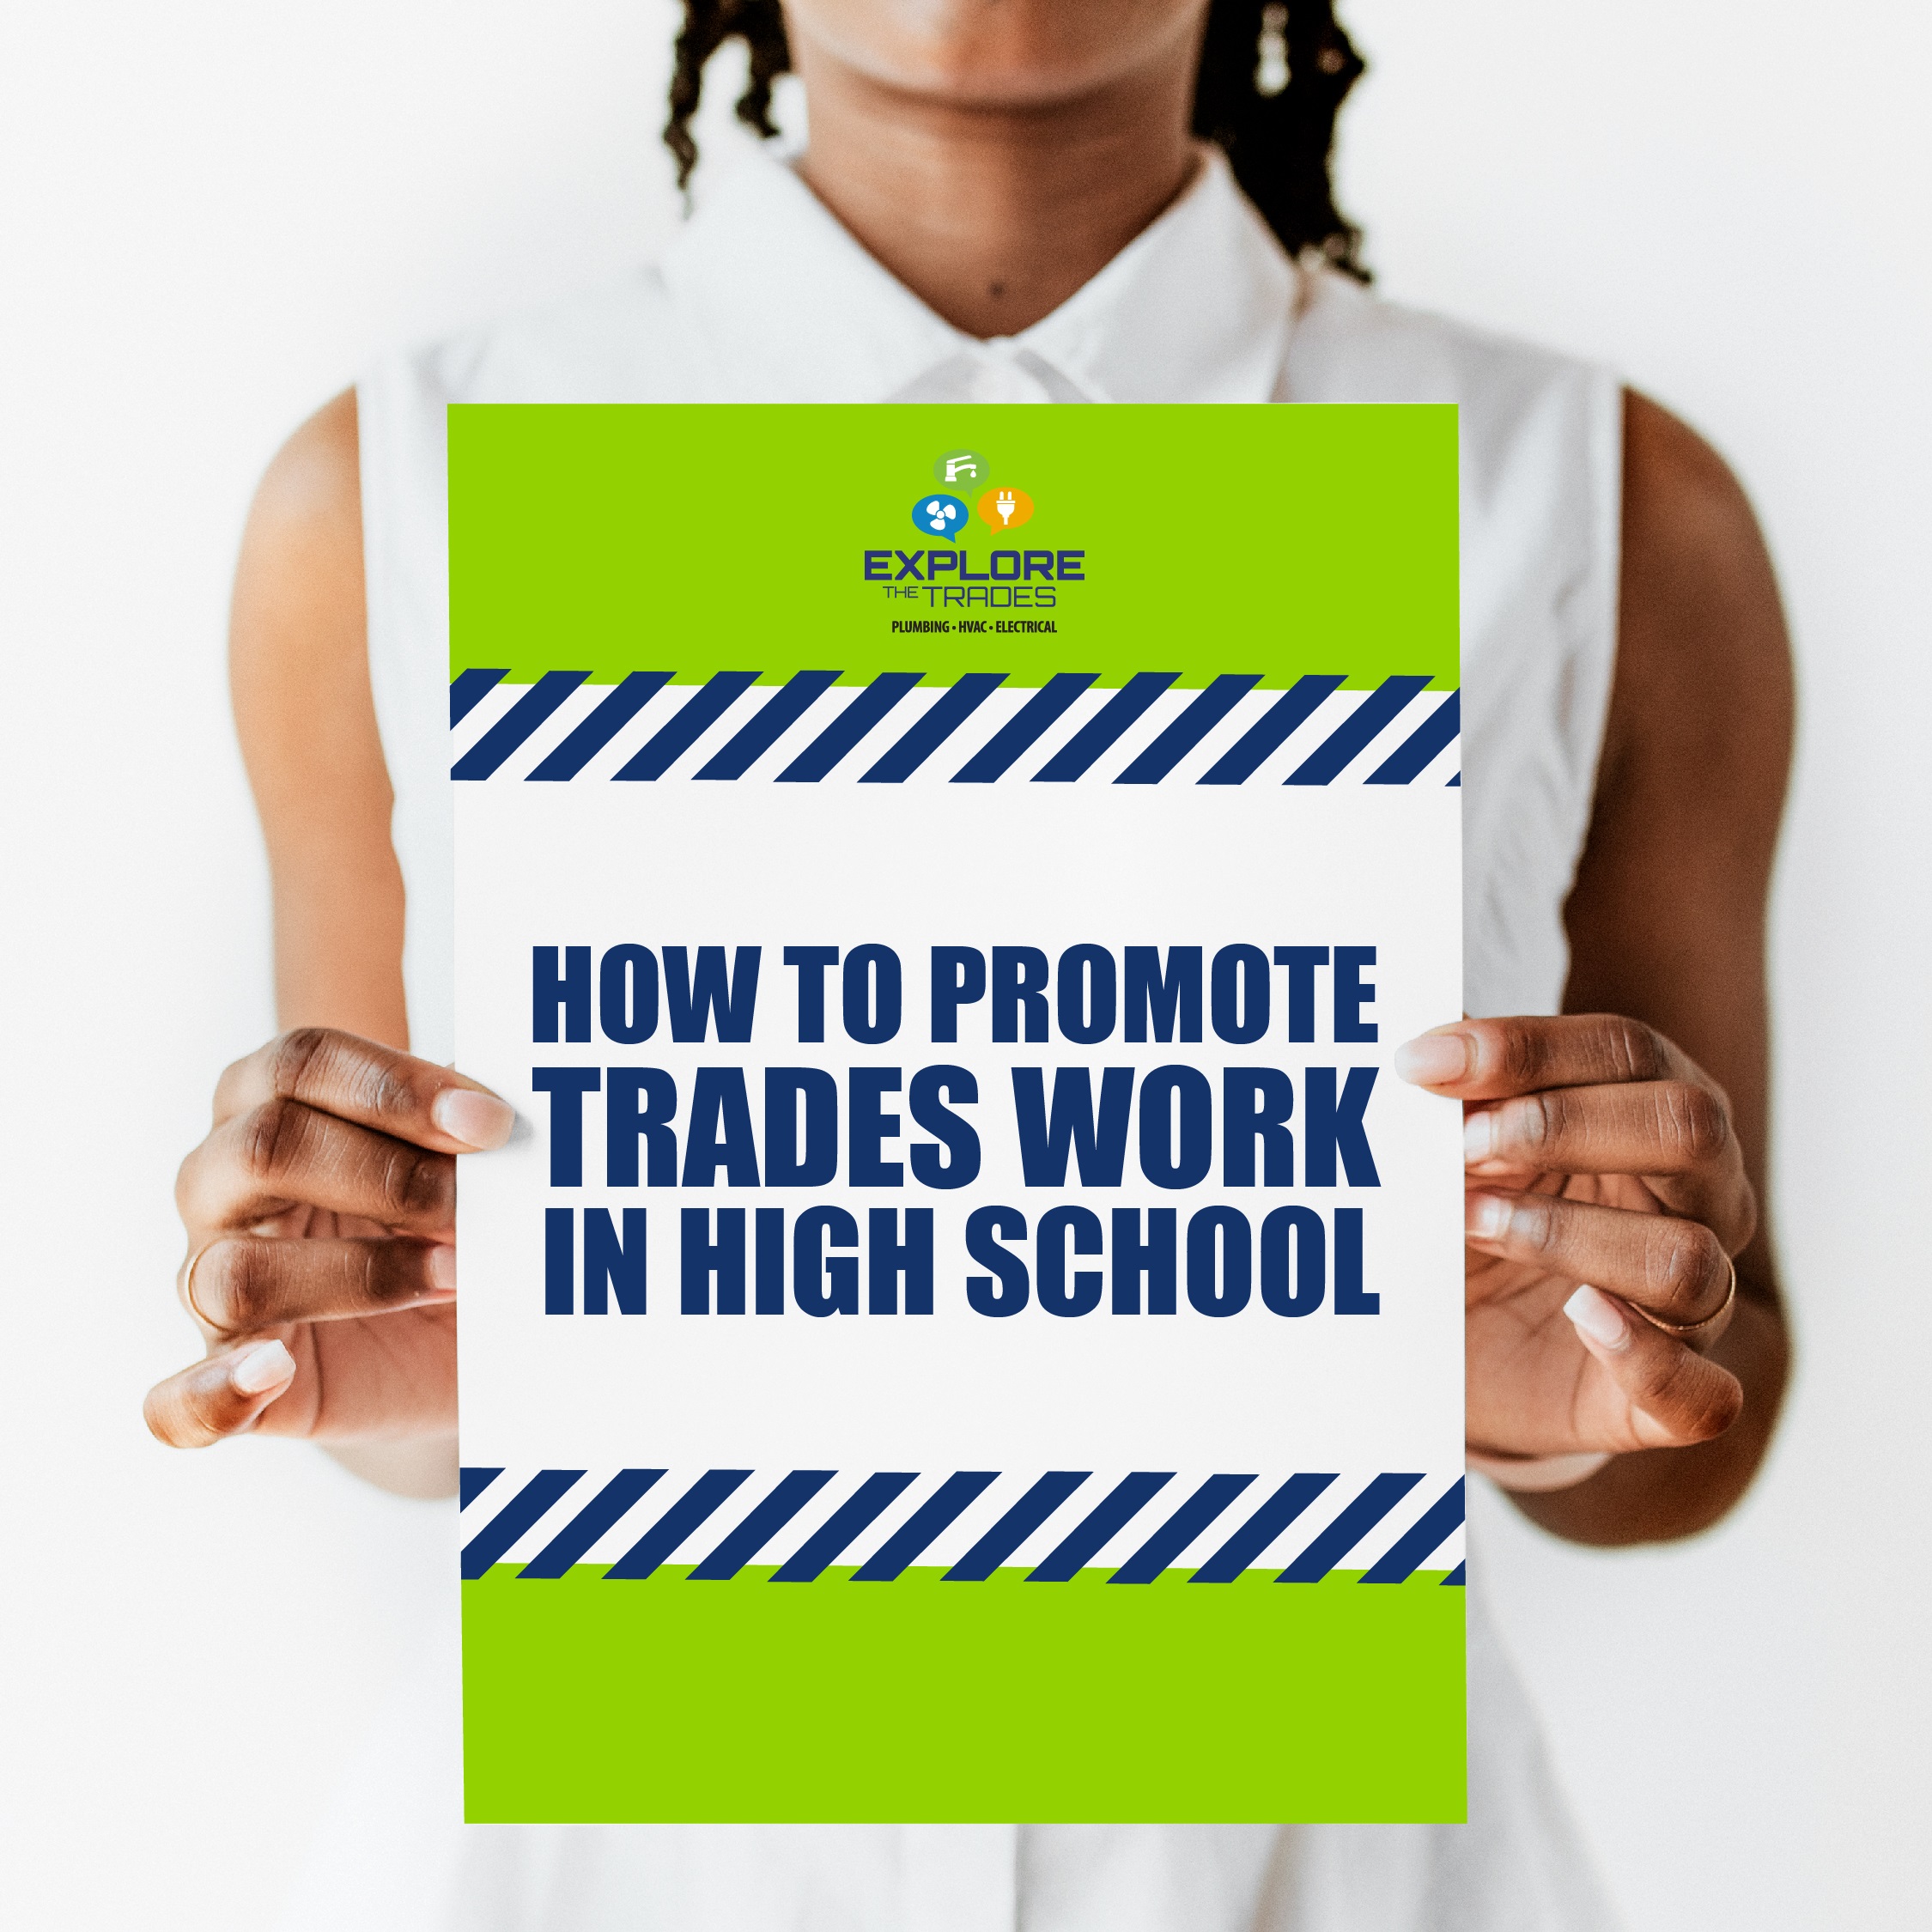 How To Promote Trades Work in High School featured image